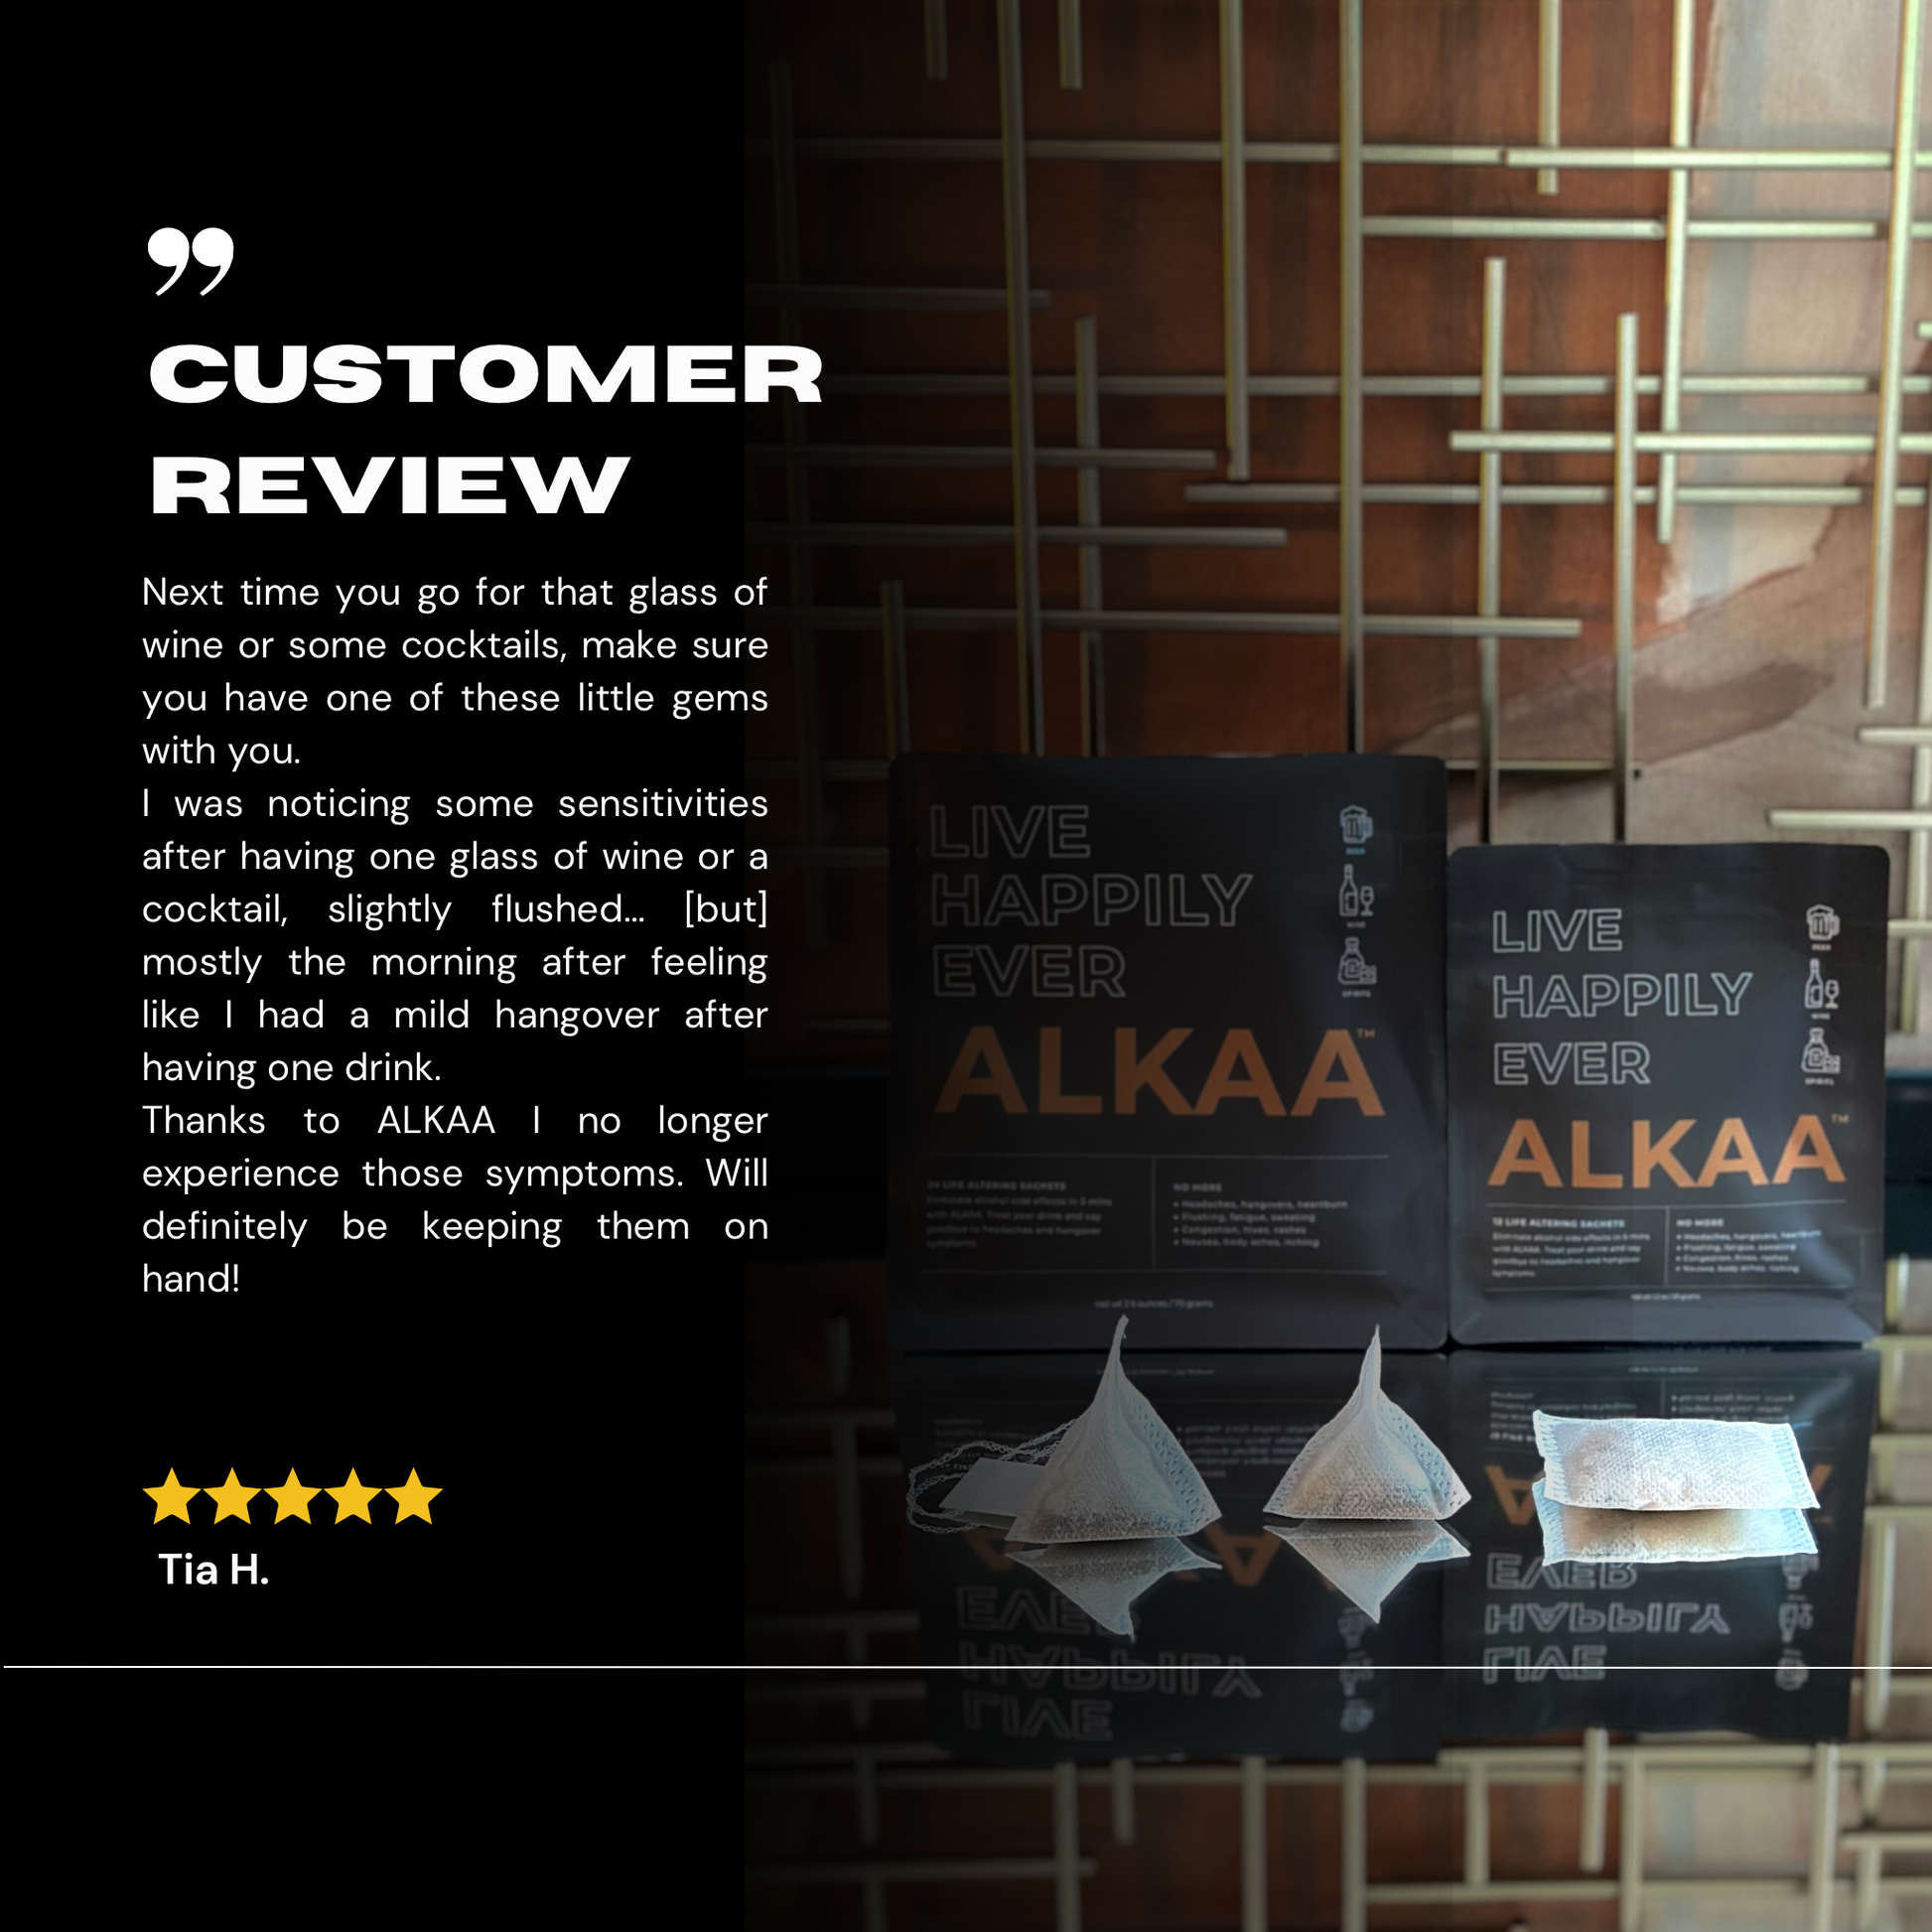 ALKAA sachet hangover prevention bags front and rear. Testimonial. Hangover cure, alcohol intolerance prevention